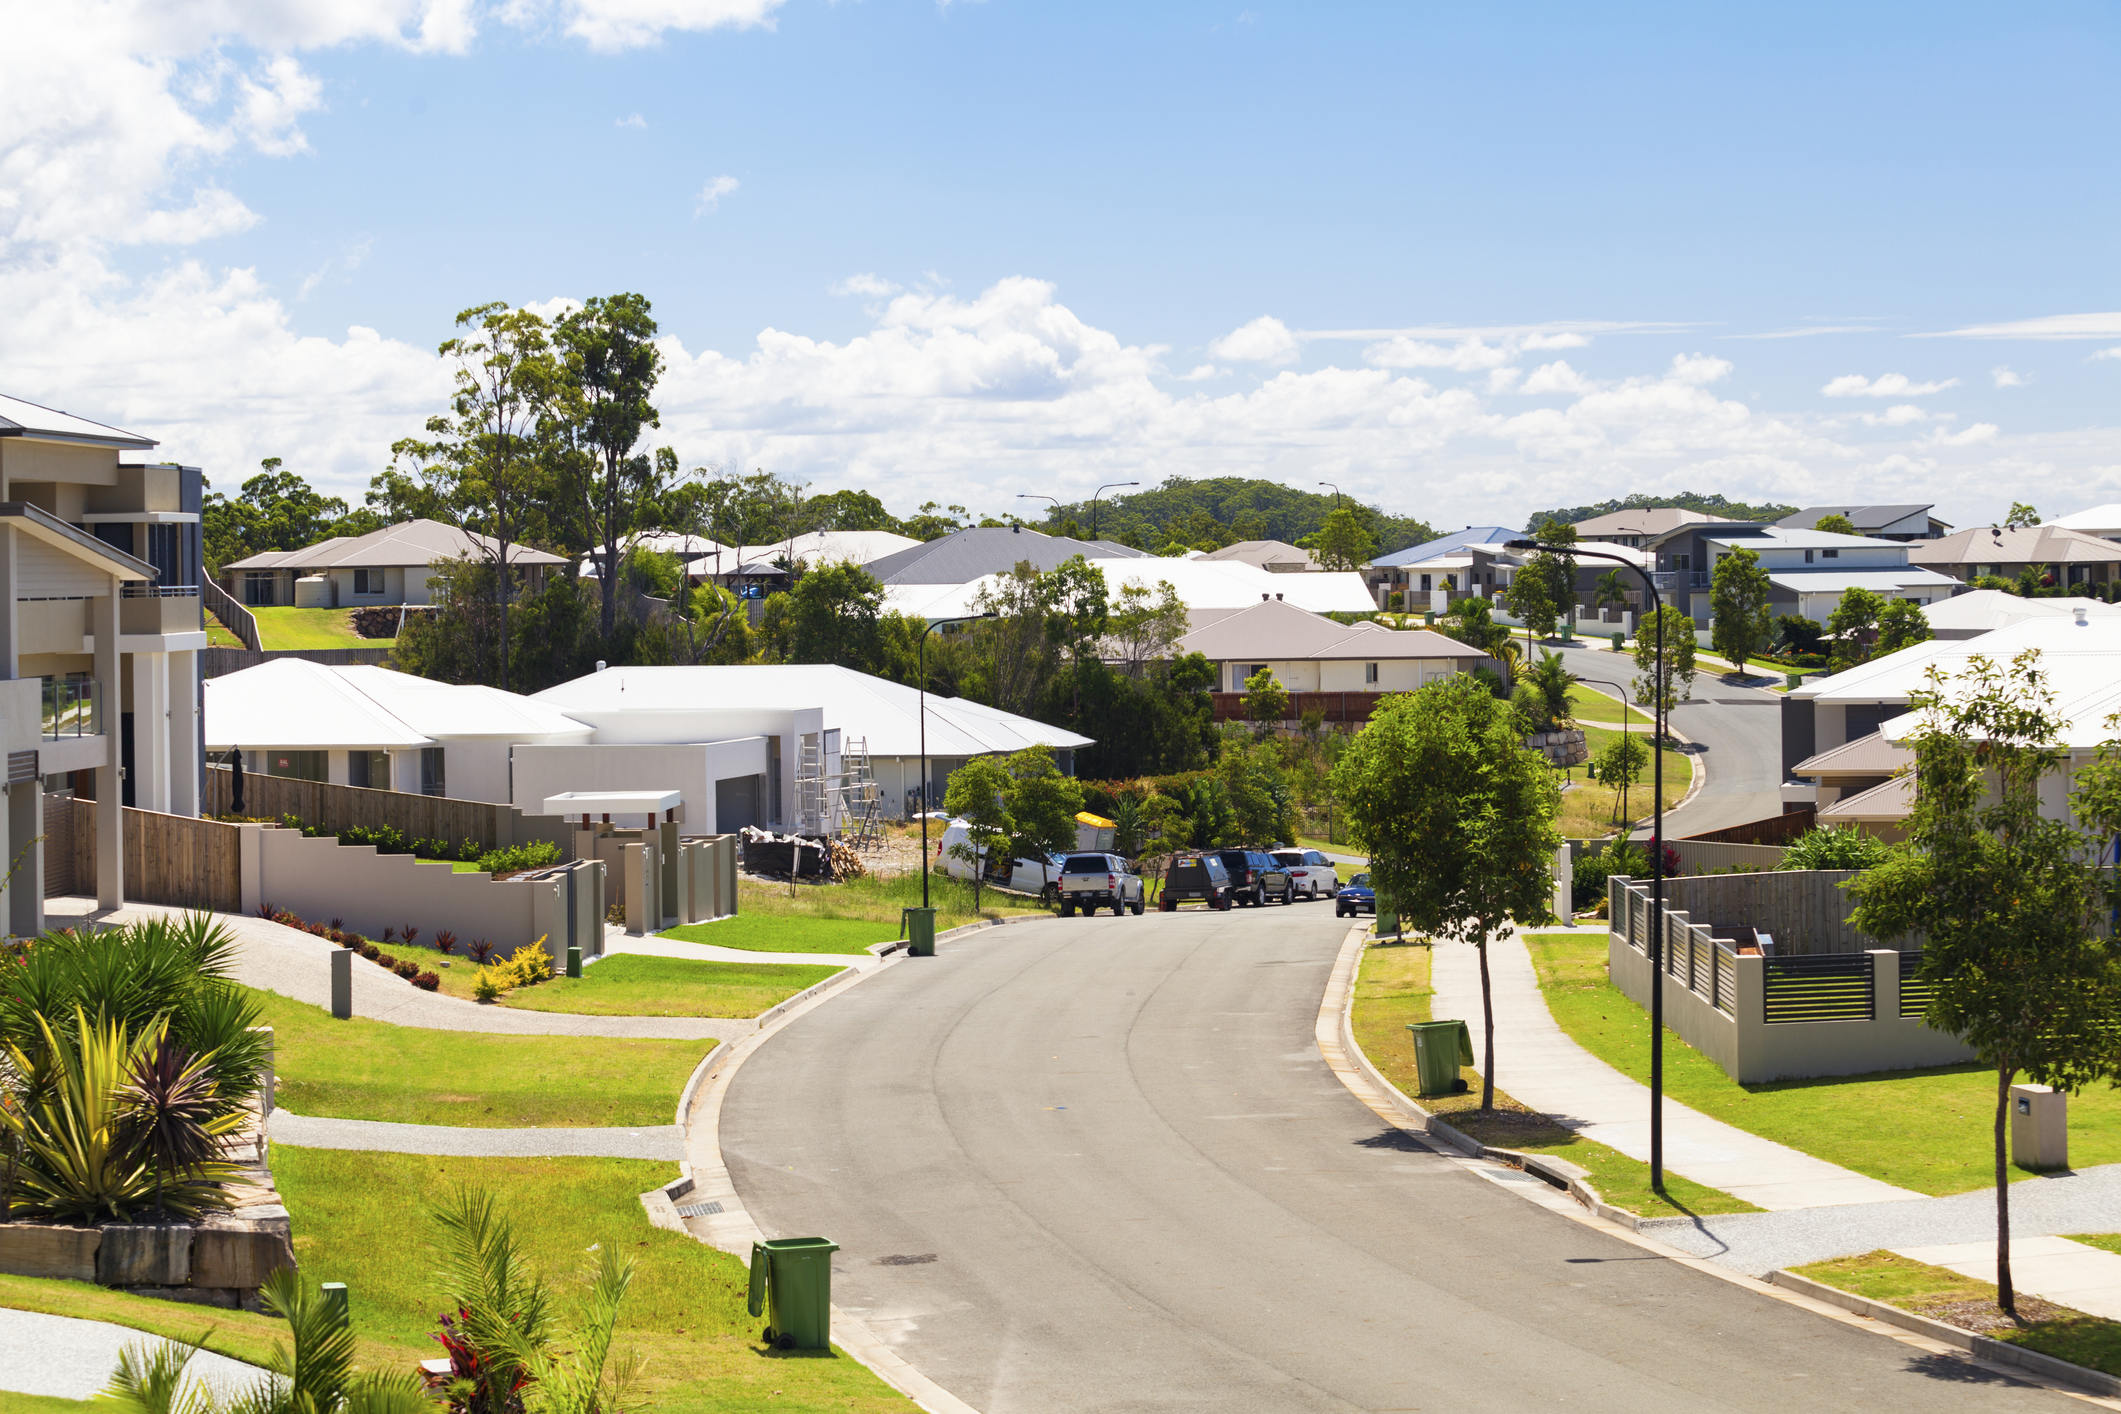 Region’s property boom highlighted in national report